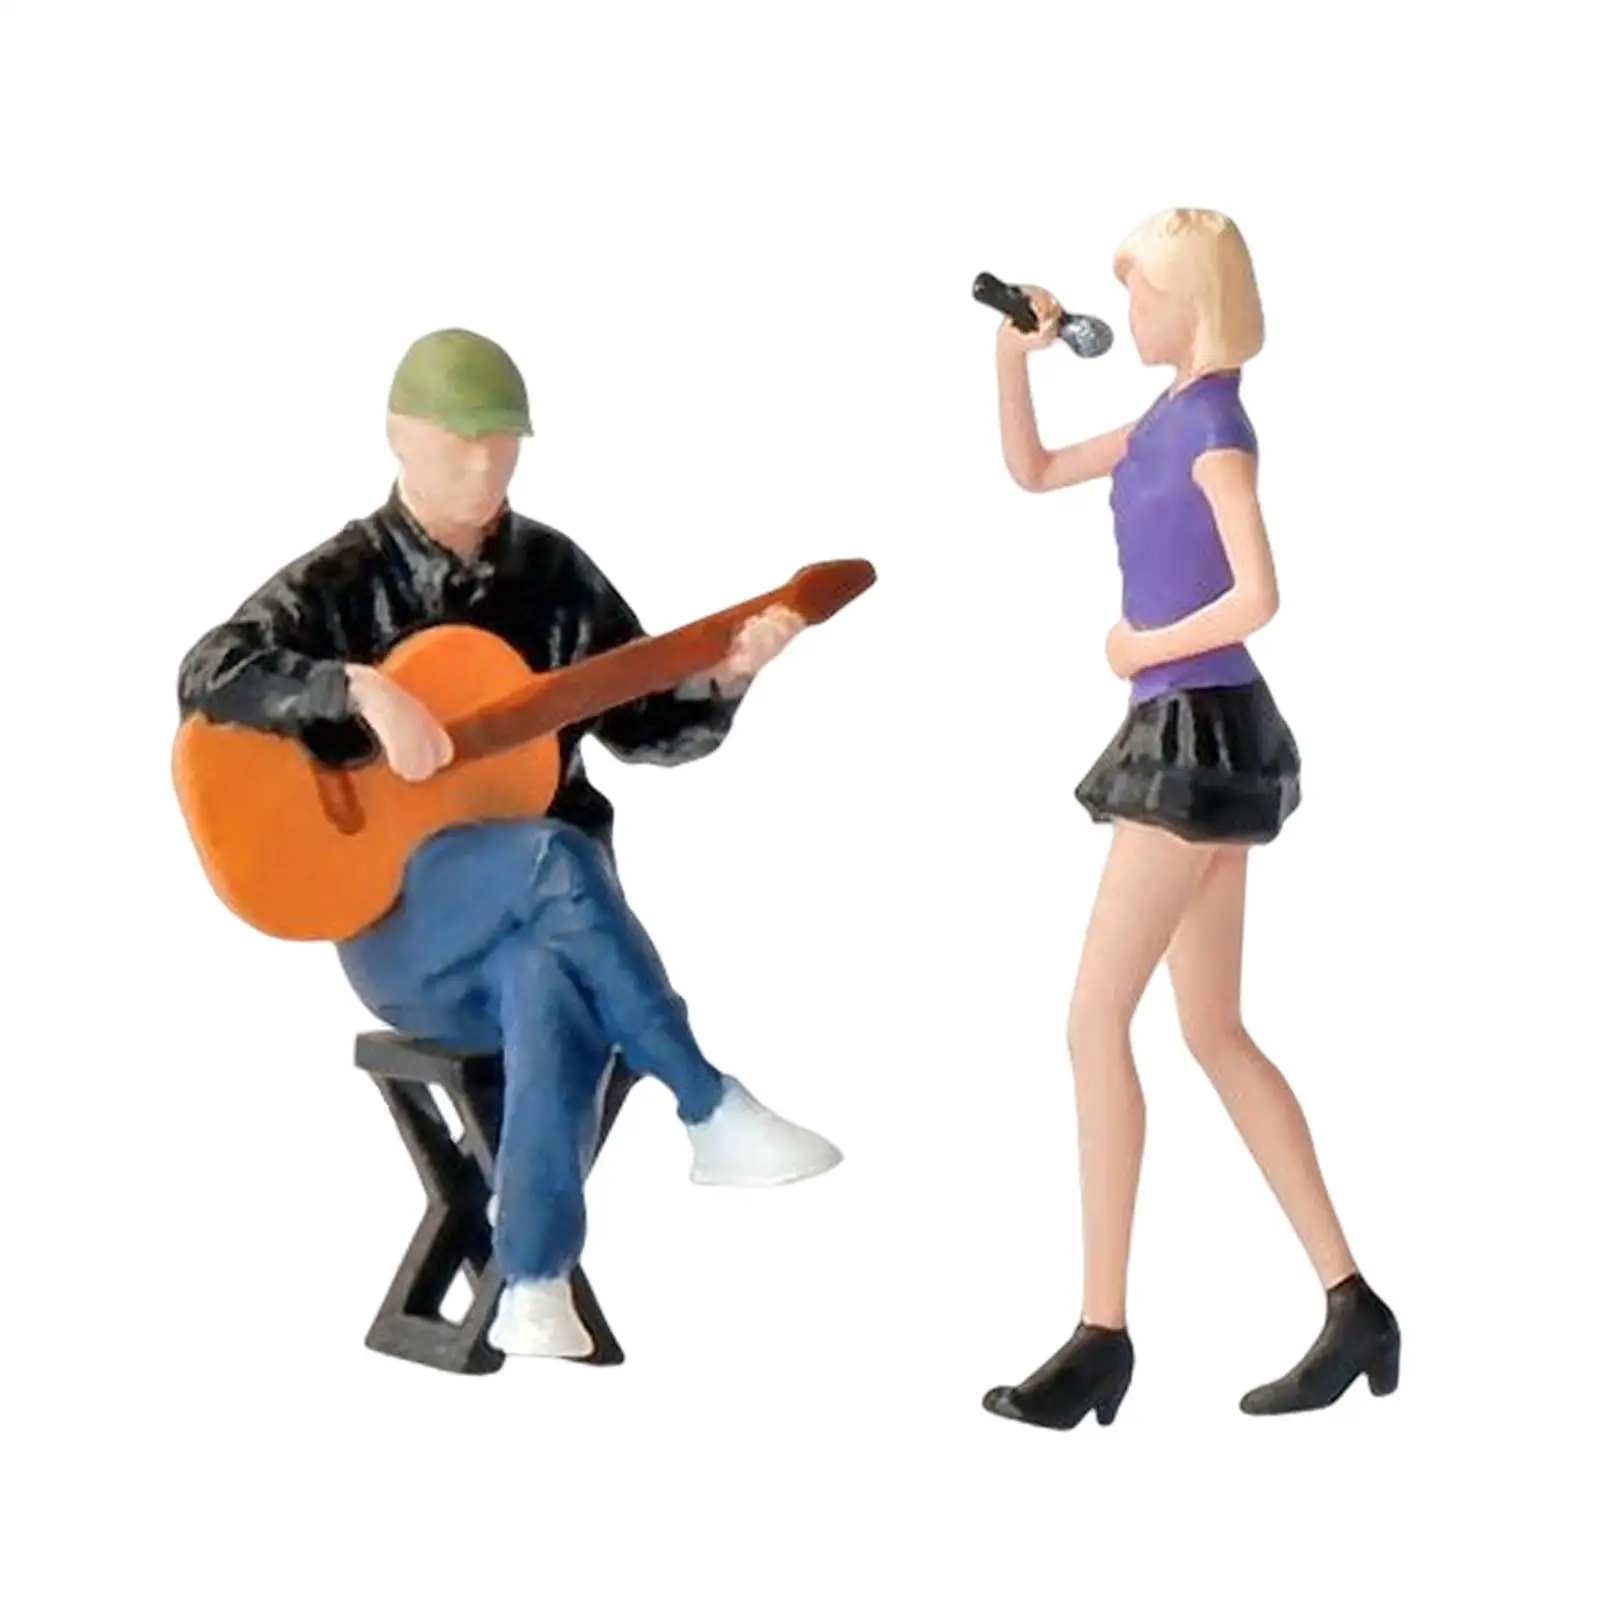 1/64 Guitarist and Singer Figures Hand Painted Miniature Figures Model for Scenery Landscape Decor